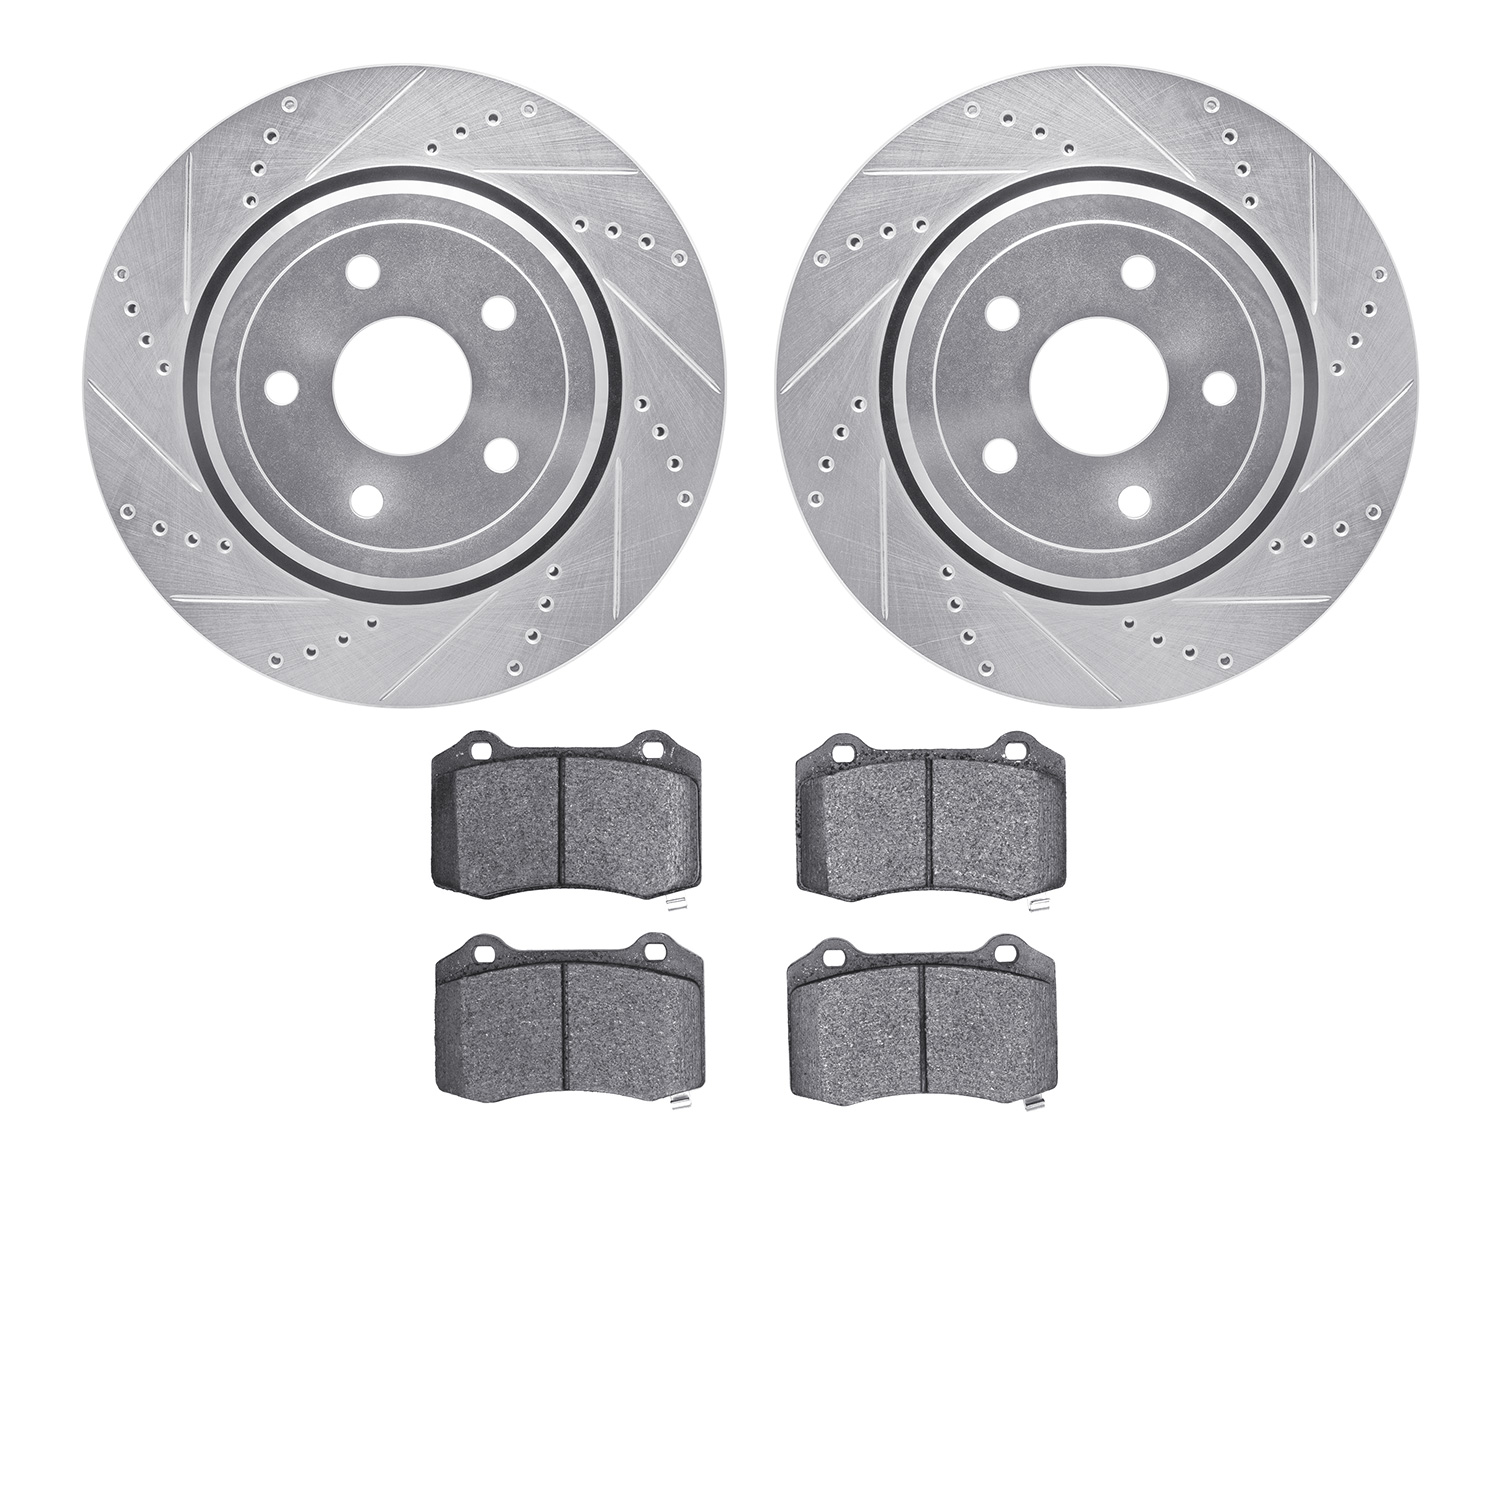 7402-42010 Drilled/Slotted Brake Rotors with Ultimate-Duty Brake Pads Kit [Silver], Fits Select Mopar, Position: Rear